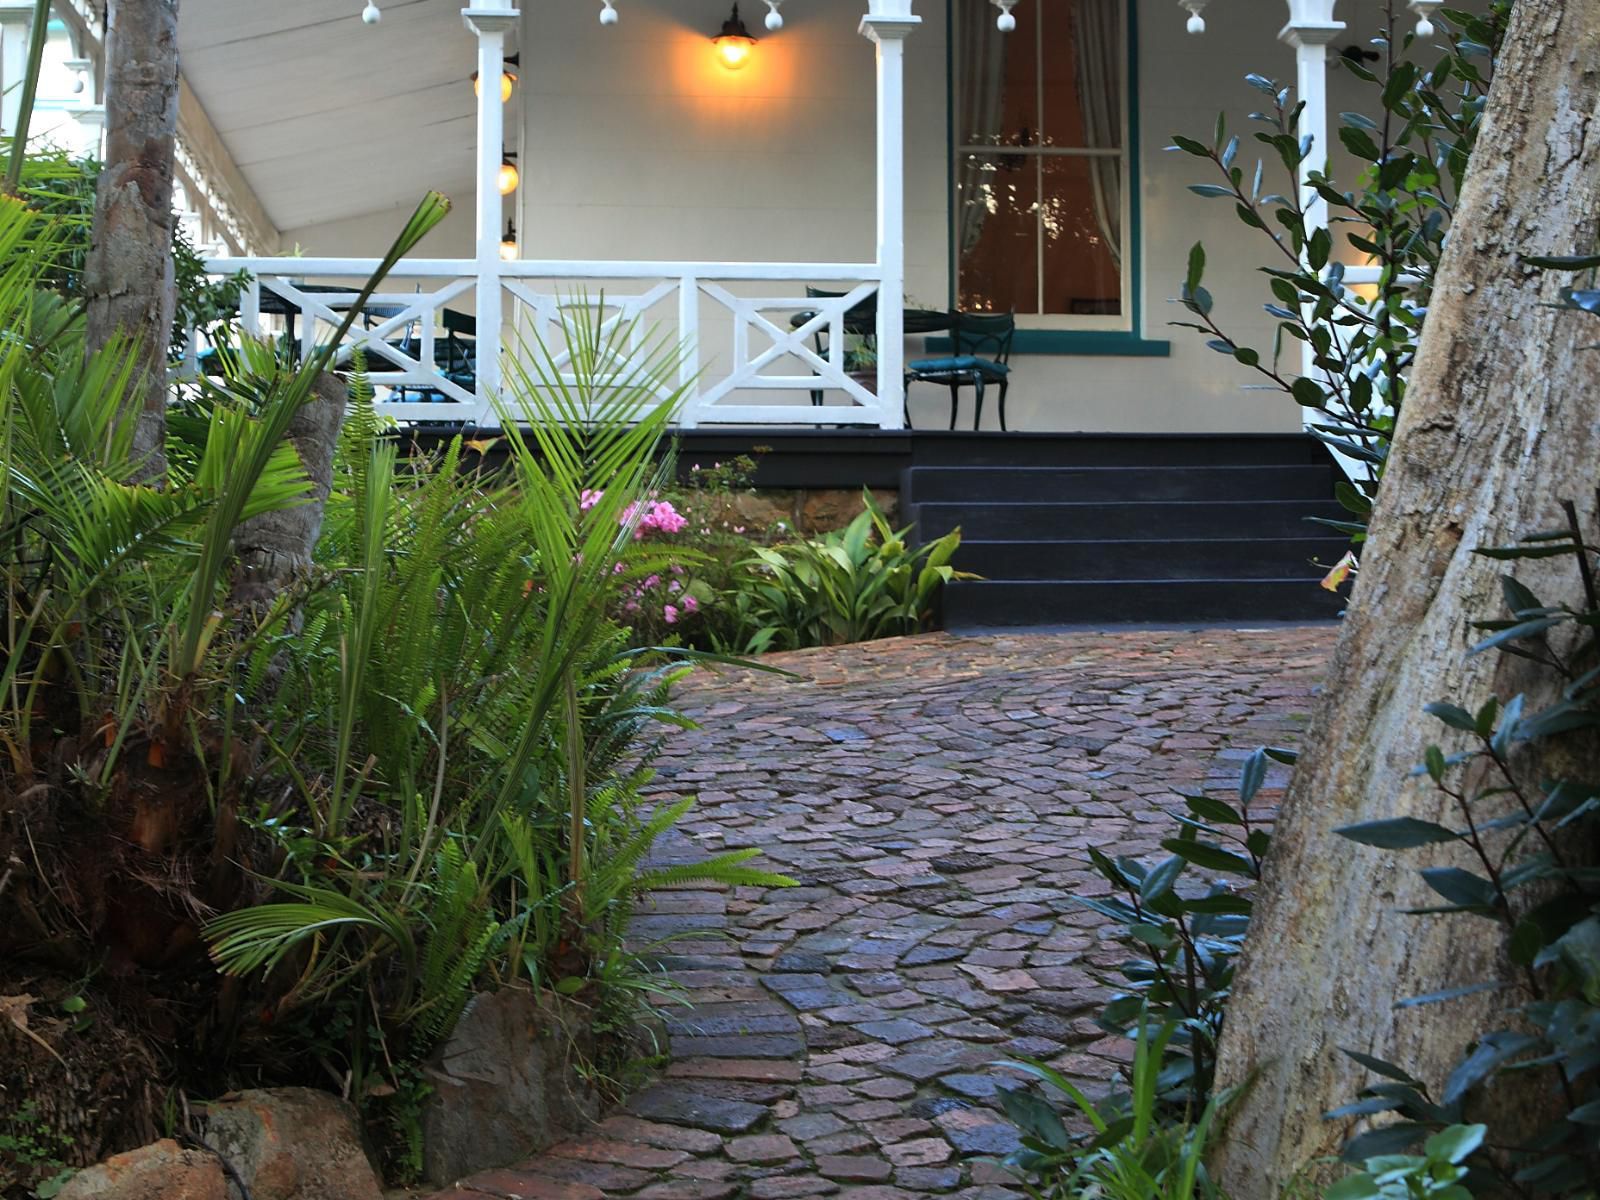 Knysna Yellowwood Lodge West Hill Knysna Western Cape South Africa House, Building, Architecture, Garden, Nature, Plant